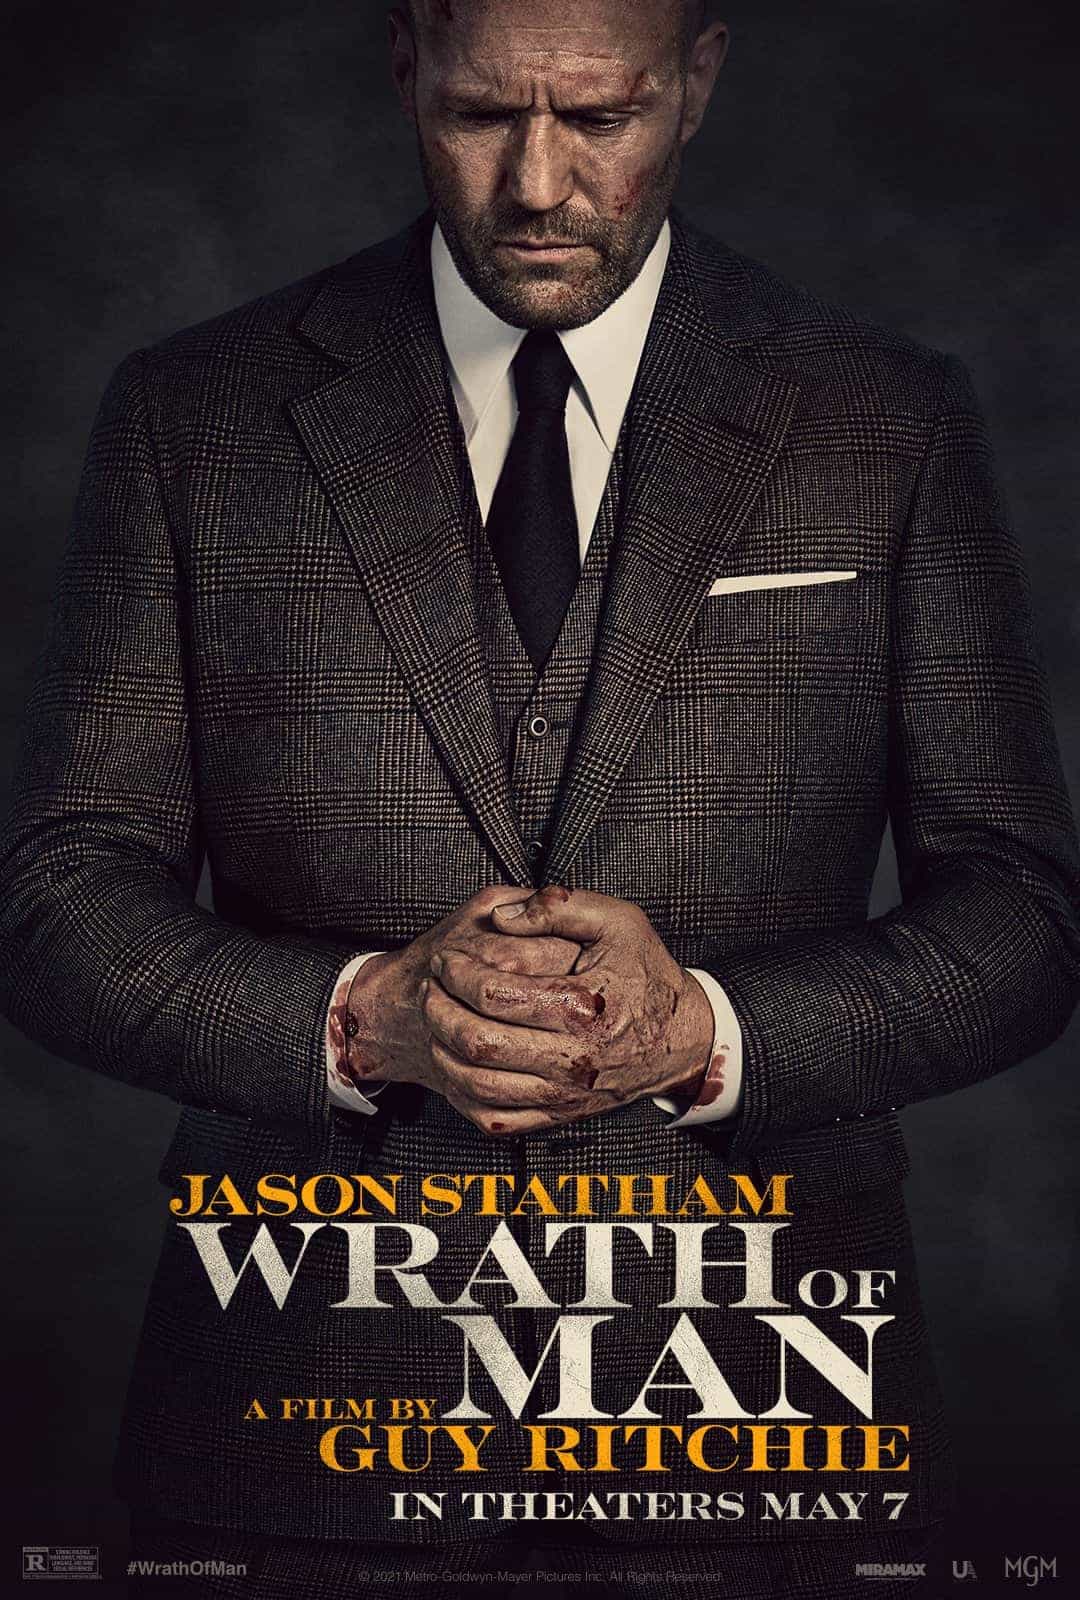 New poster released for Wrath of Man directed by Guy Ritchie and starring Jason Statham